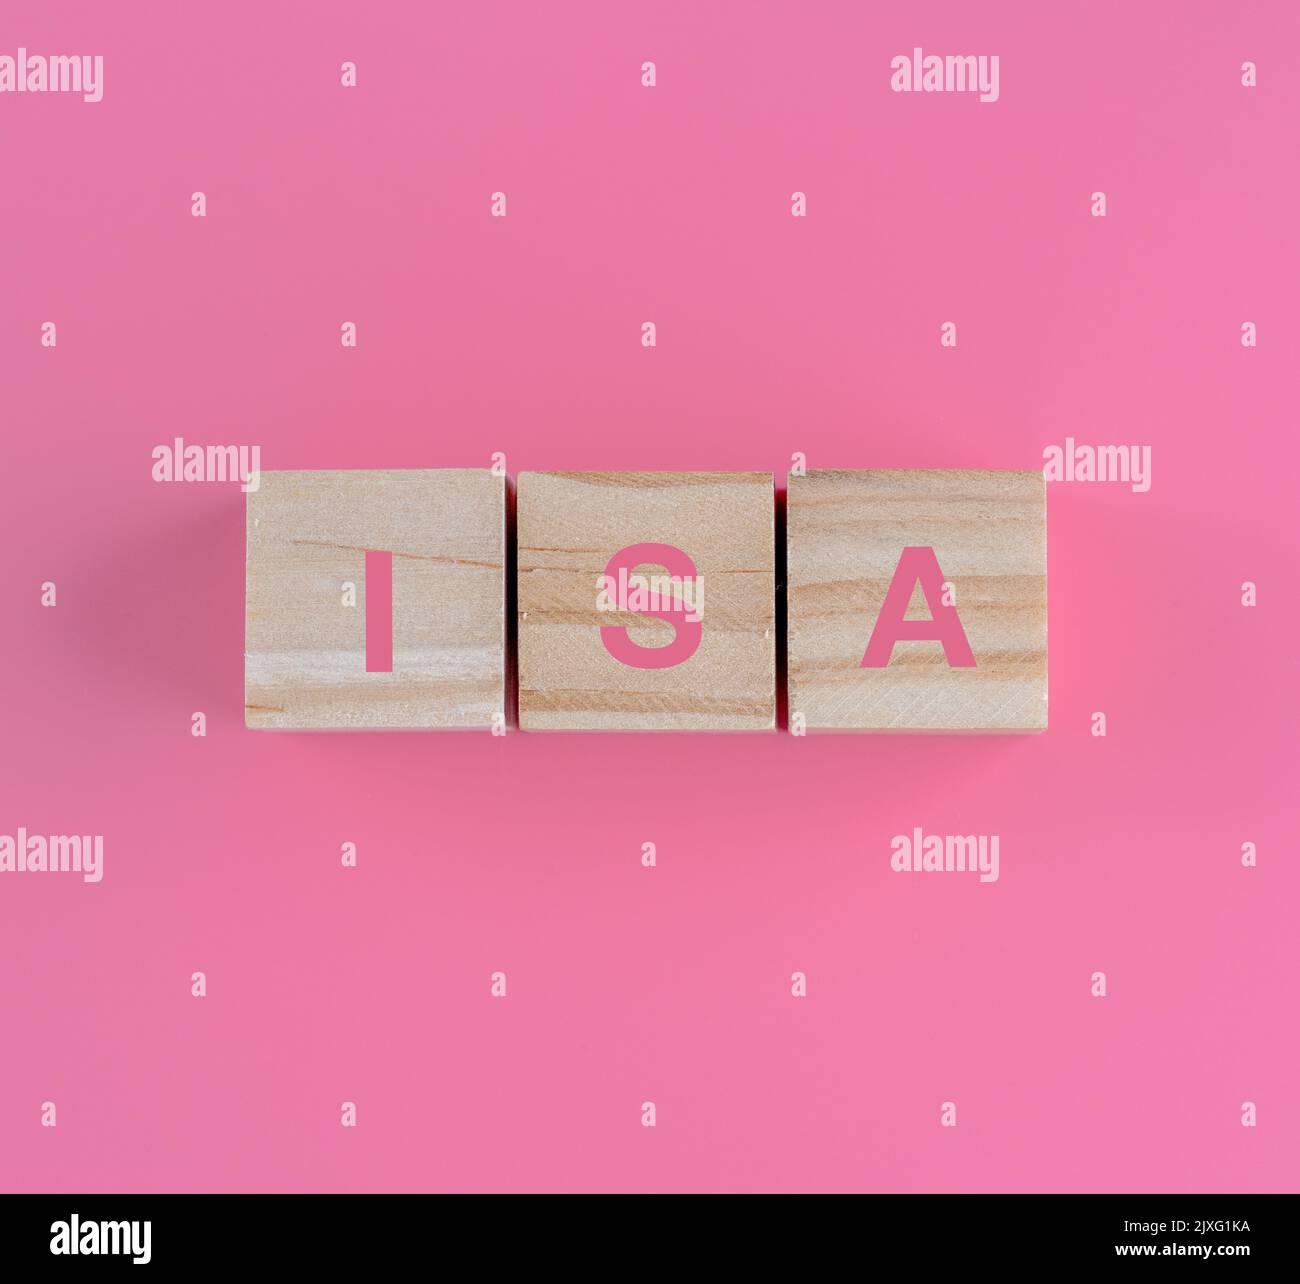 cash or stocks and shares ISA investment concept  building blocks on a pink background Stock Photo